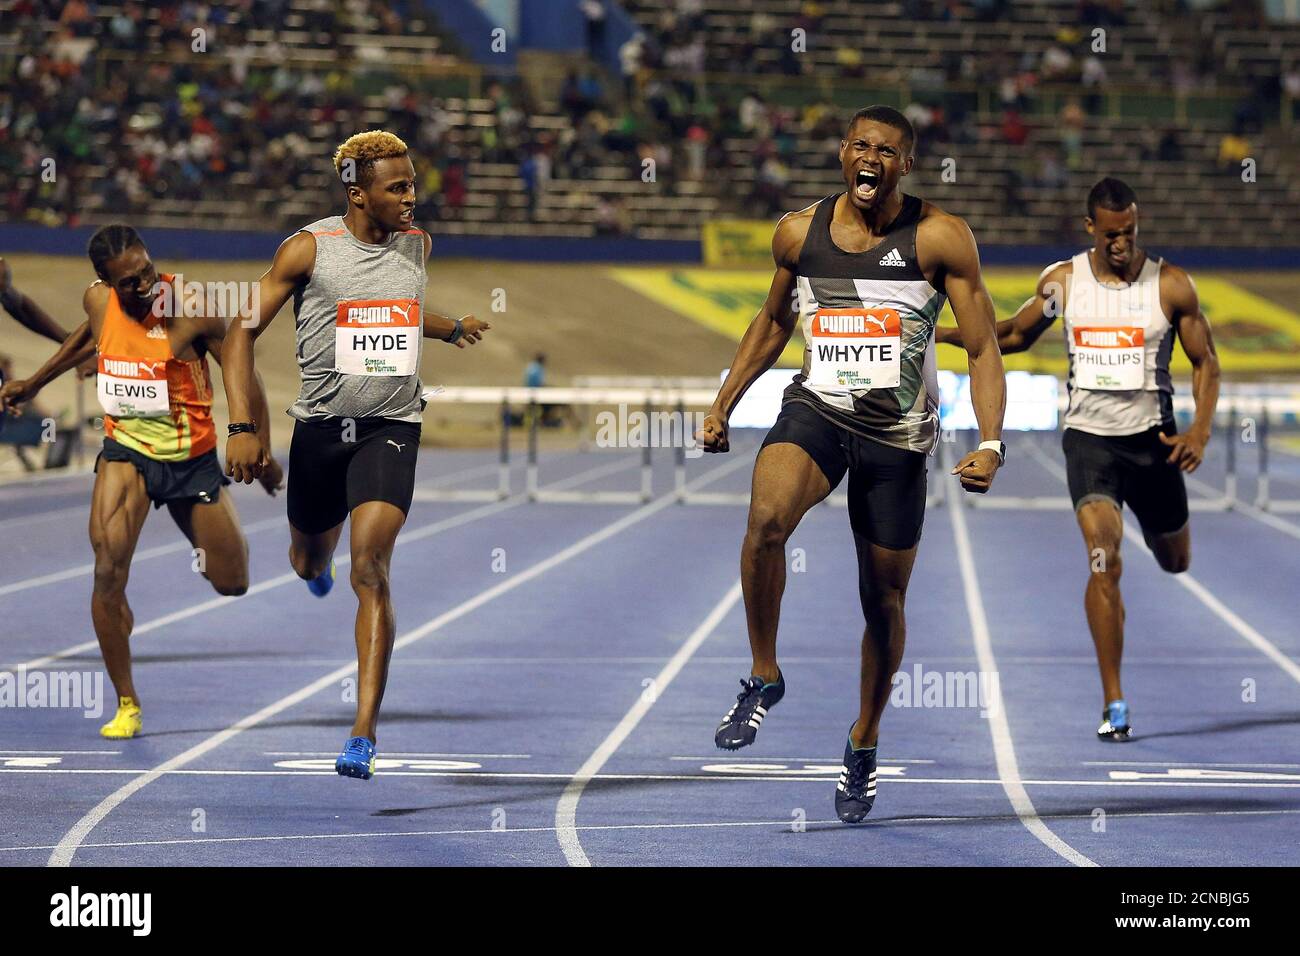 Athletics - Jamaica National Trials - Kingston - 01/07/16 (L-R) Romel  Lewis, Jaheel Hyde, winner Annsert Whyte and Isa Phillips in action during  men's 400m hurdles final race. REUTERS/Gilbert Bellamy Stock Photo - Alamy